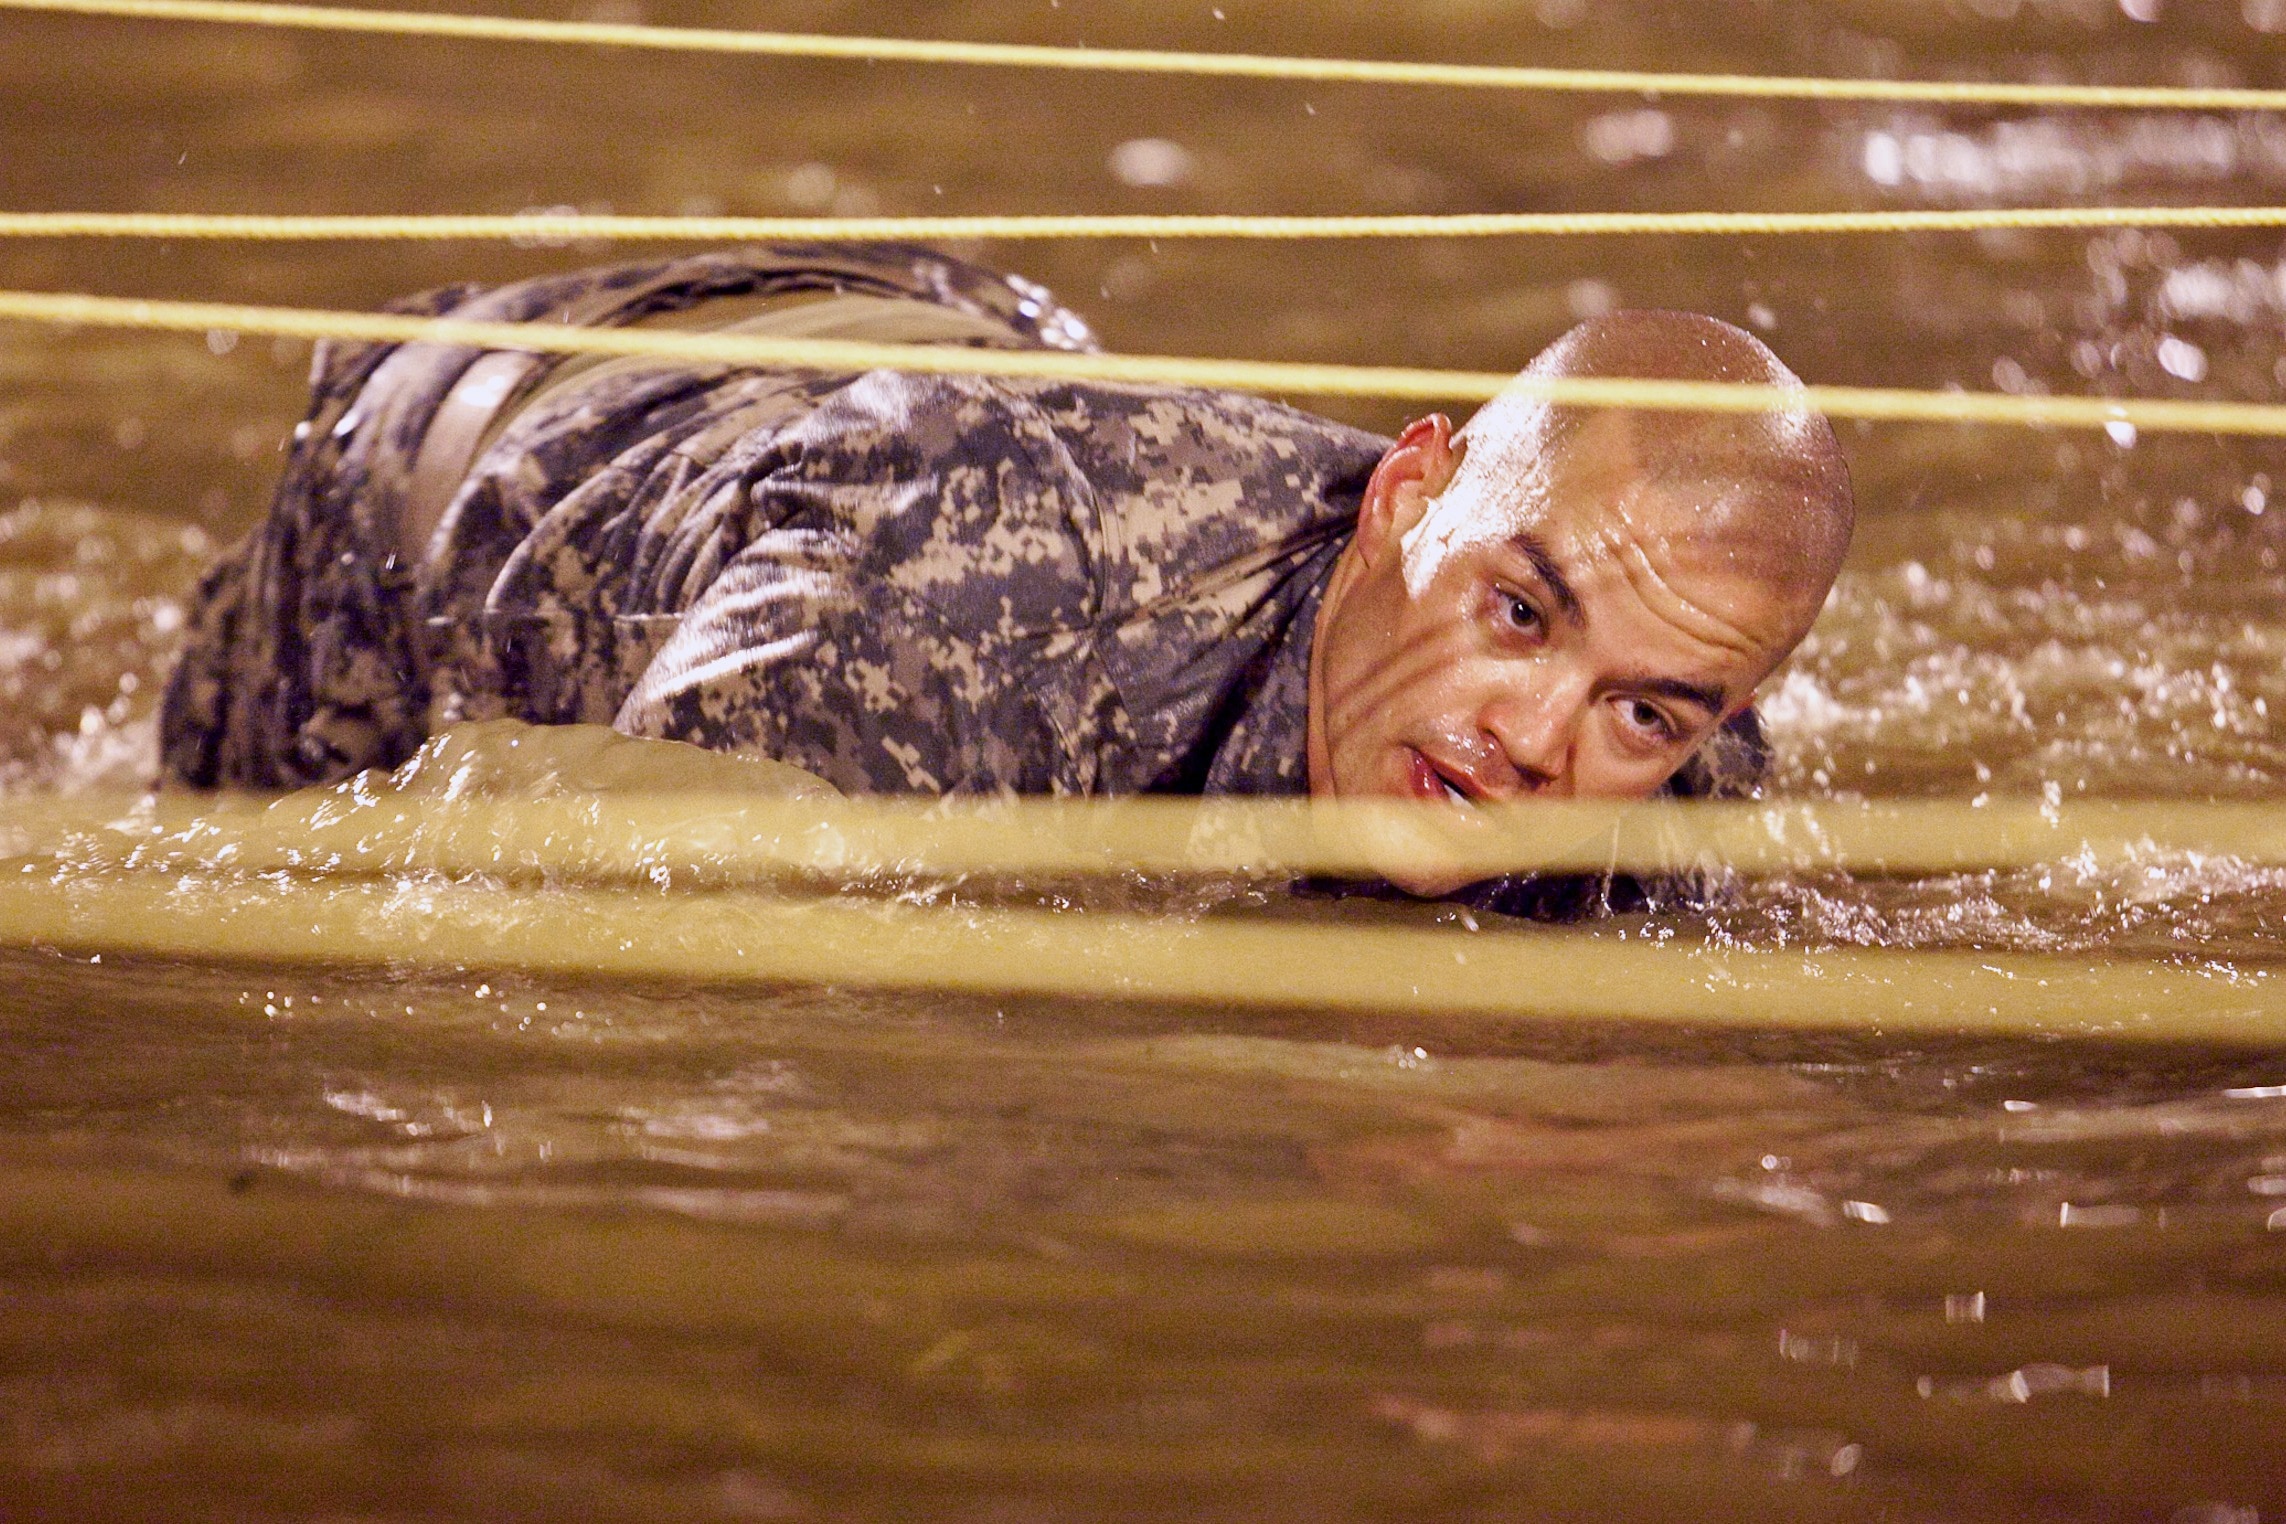 Military crawling in body of water